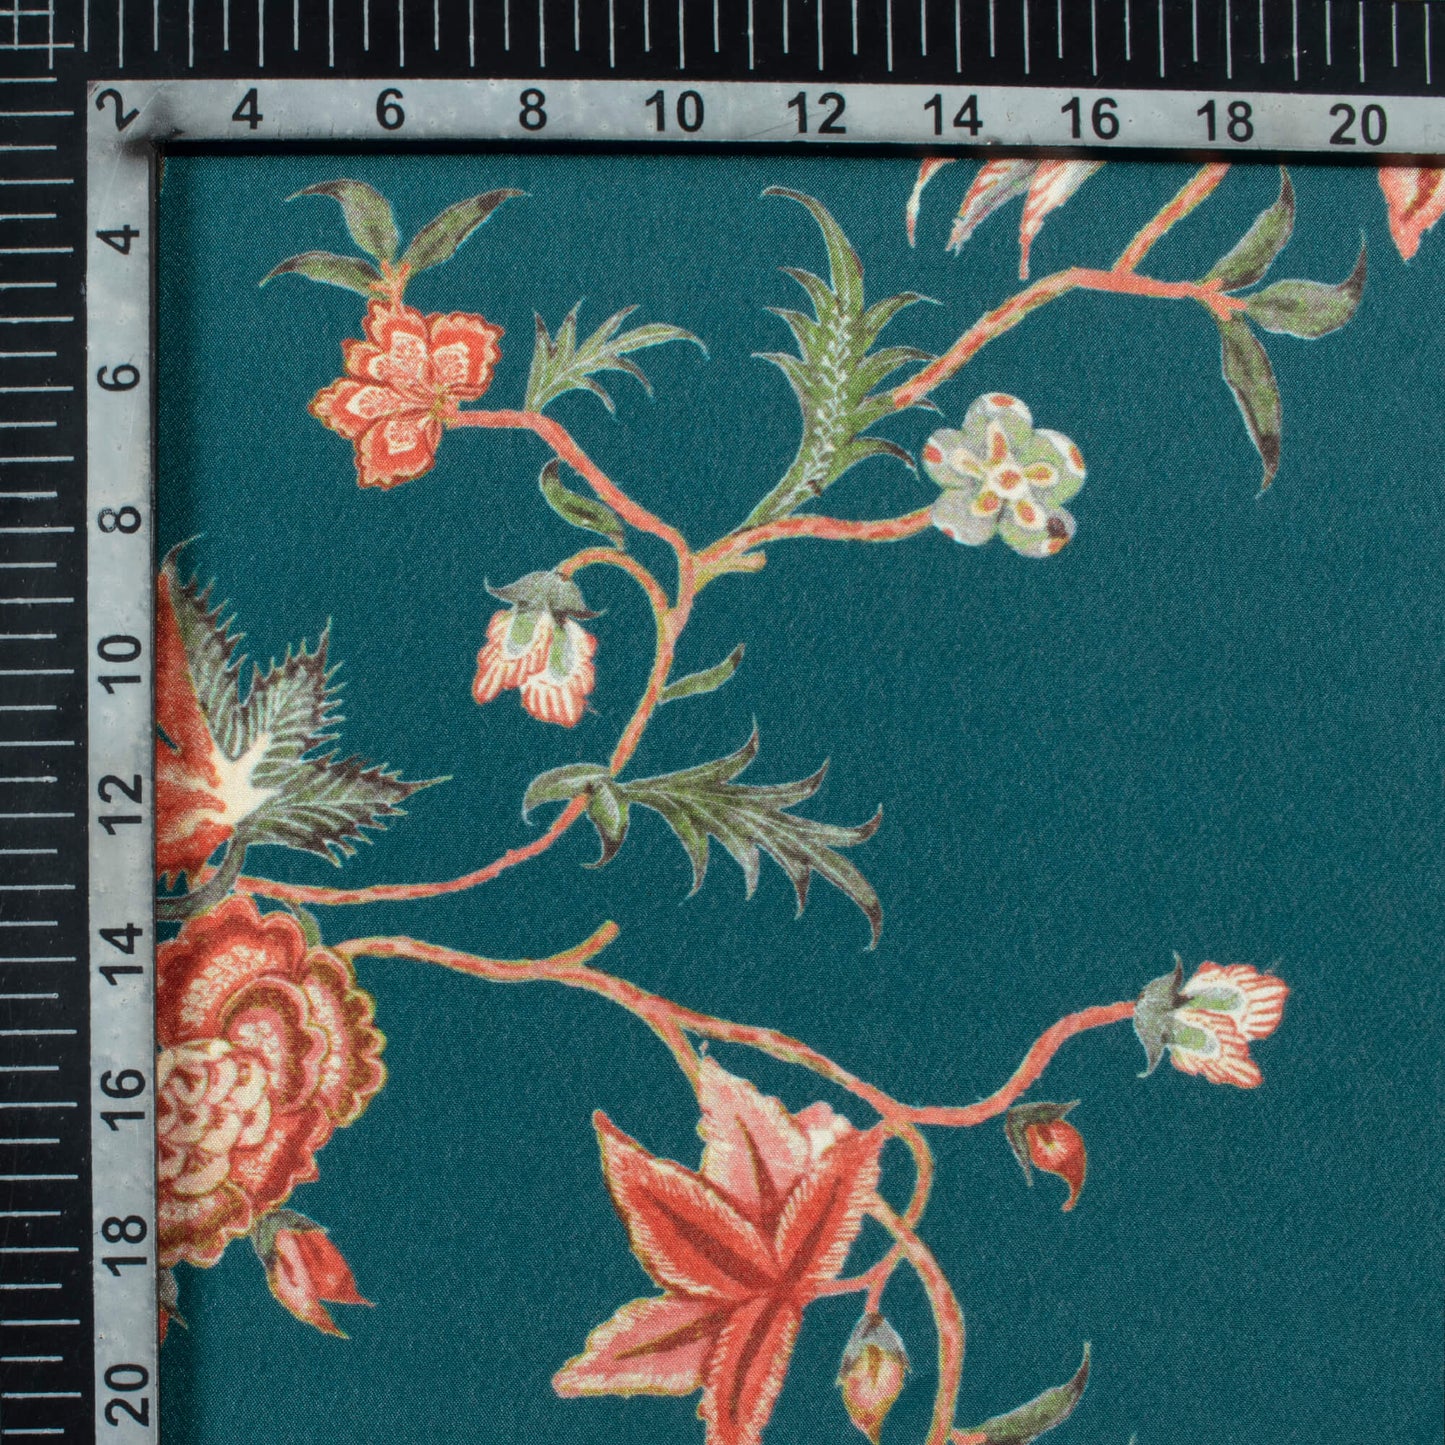 Peacock Blue And Red Floral Pattern Digital Print Crepe Silk Fabric